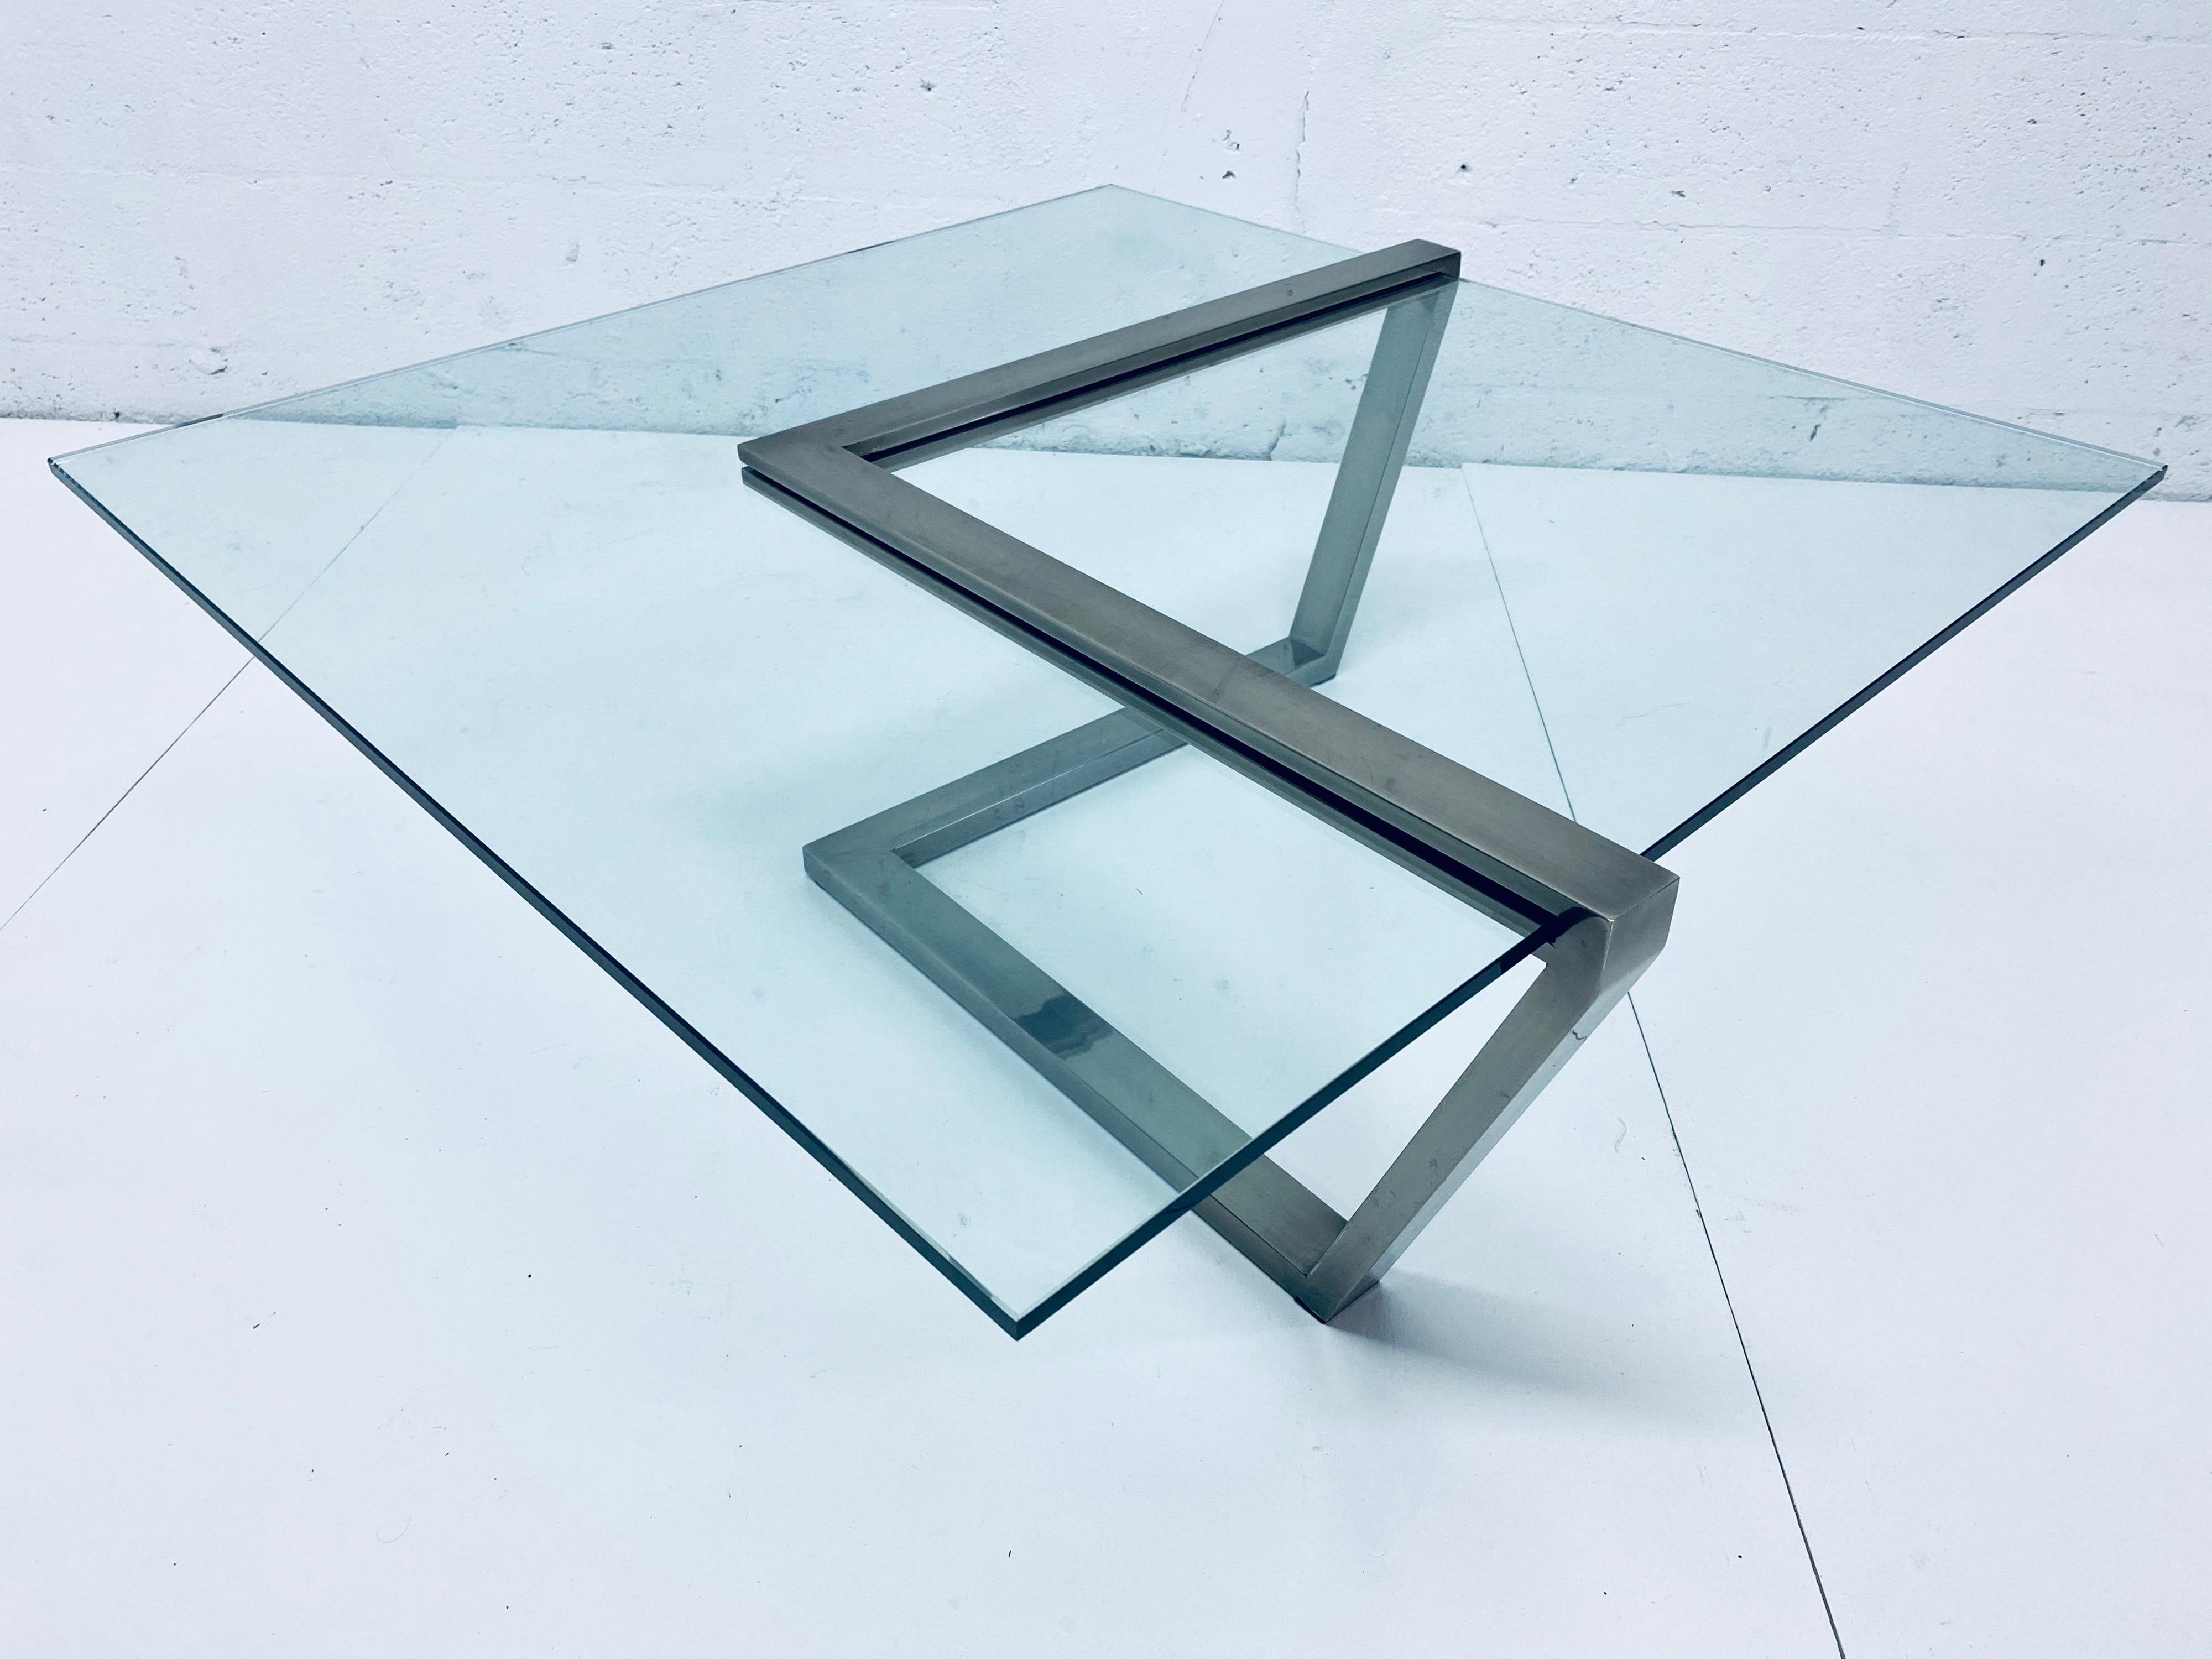 Cantilevered glass and brushed chrome coffee table by Design Institute of America, DIA. Signed.

Glass dimensions: 39-3/4